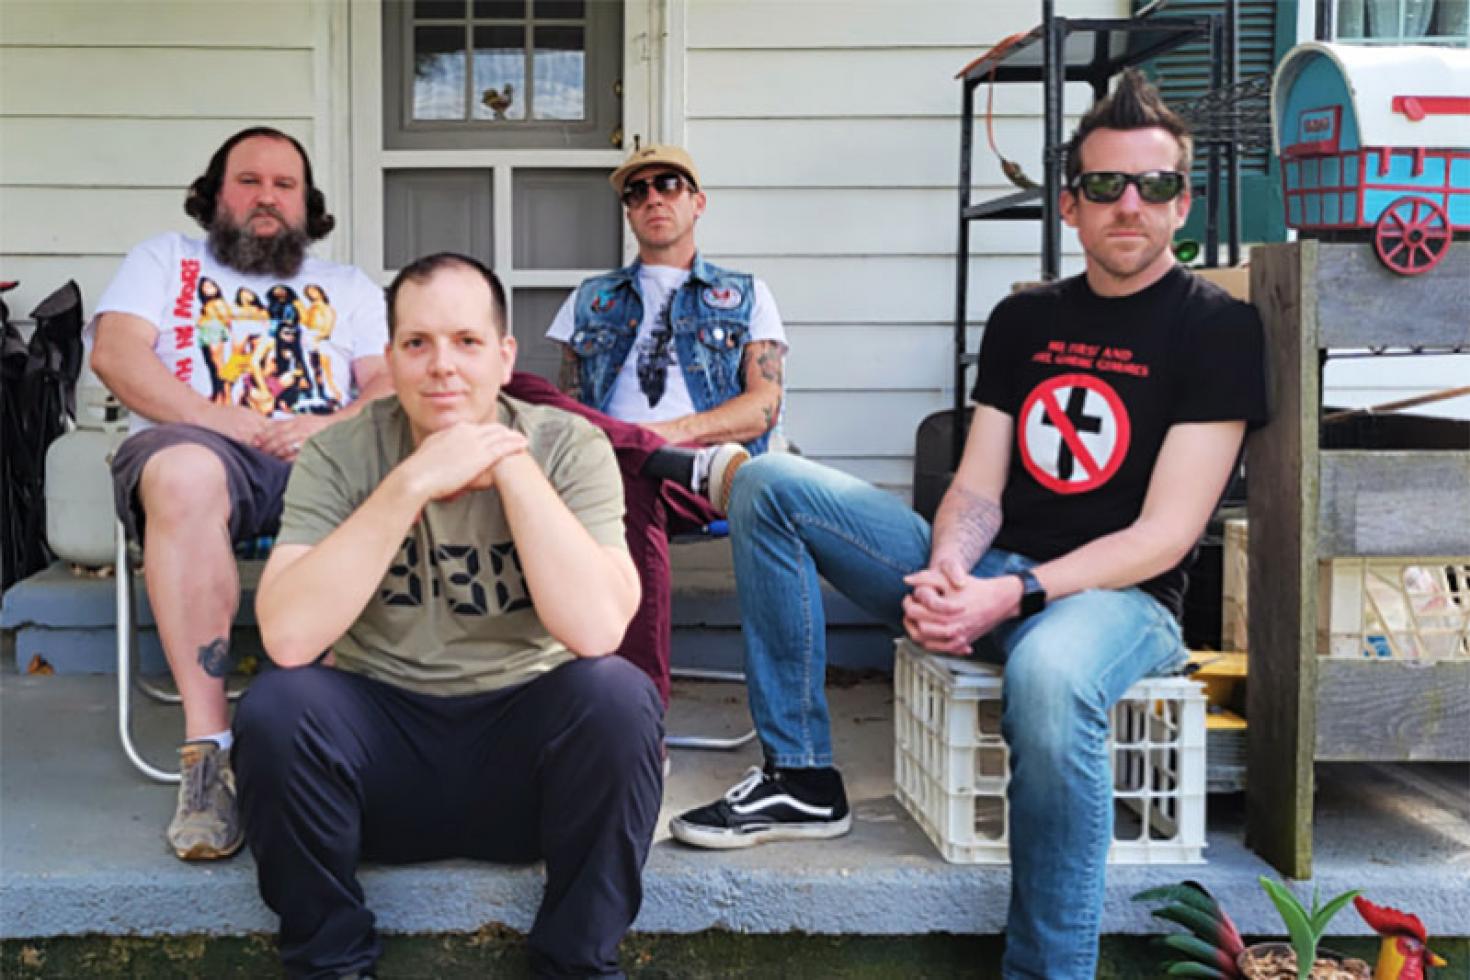 DC's American Television cover Black Flag, Op Ivy, Bad Religion, Green Day and Fugazi on new EP